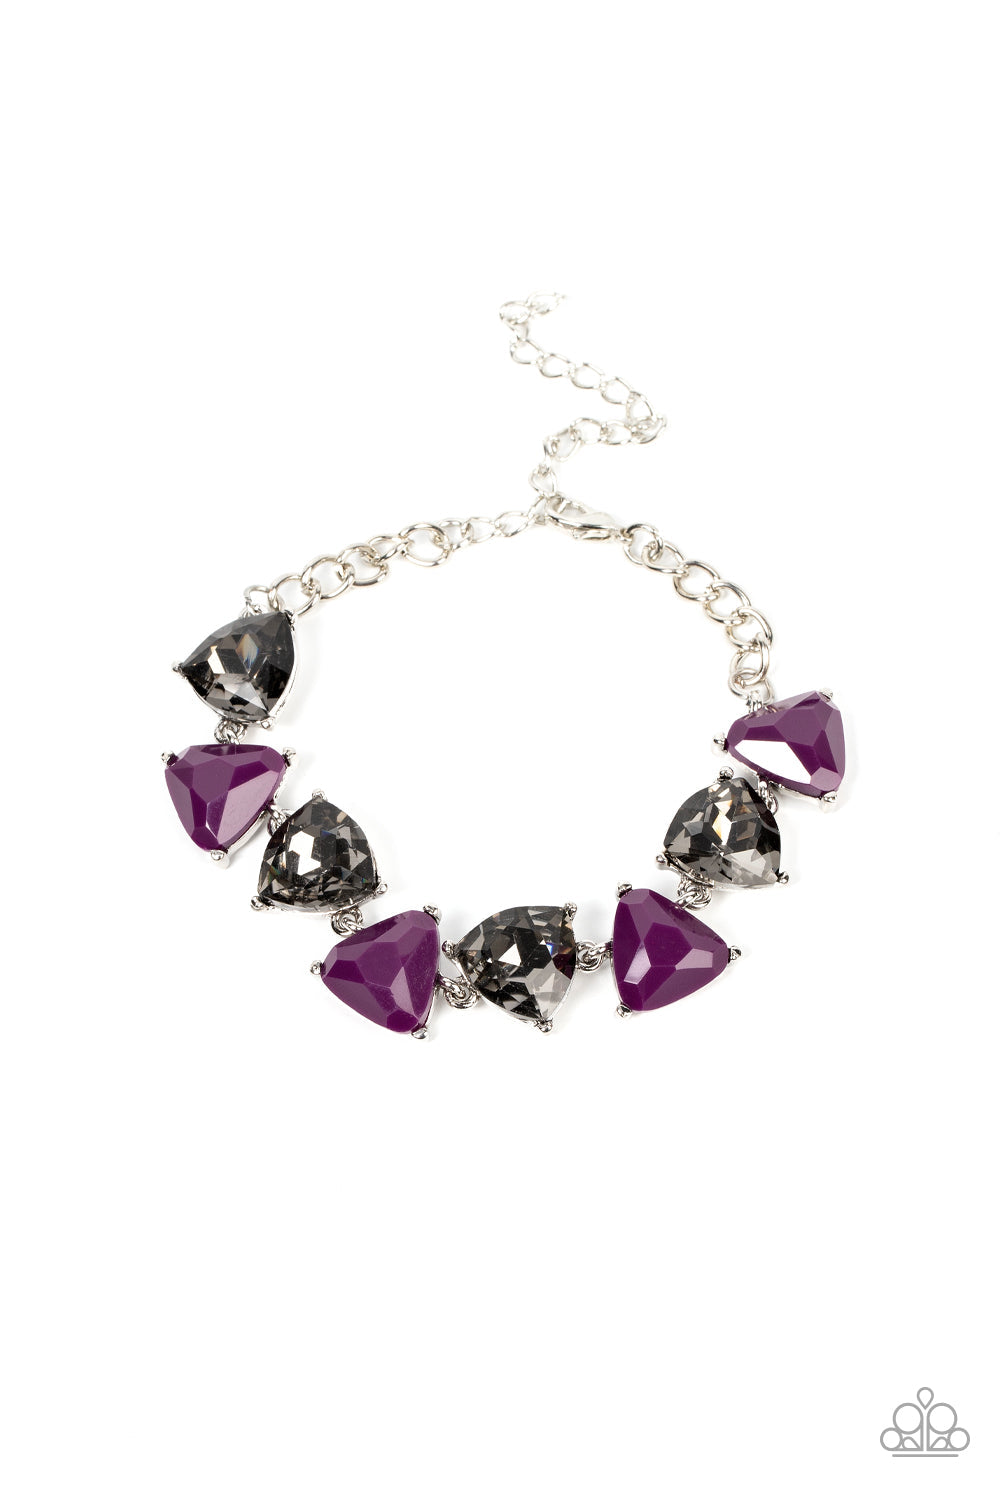 Pumped Up Prisms - Purple and Silver Bracelet - Triangular cut plum beads and smoky gems alternate around the wrist, creating a prismatic pop of color. Features an adjustable clasp closure. Sold as one individual bracelet.